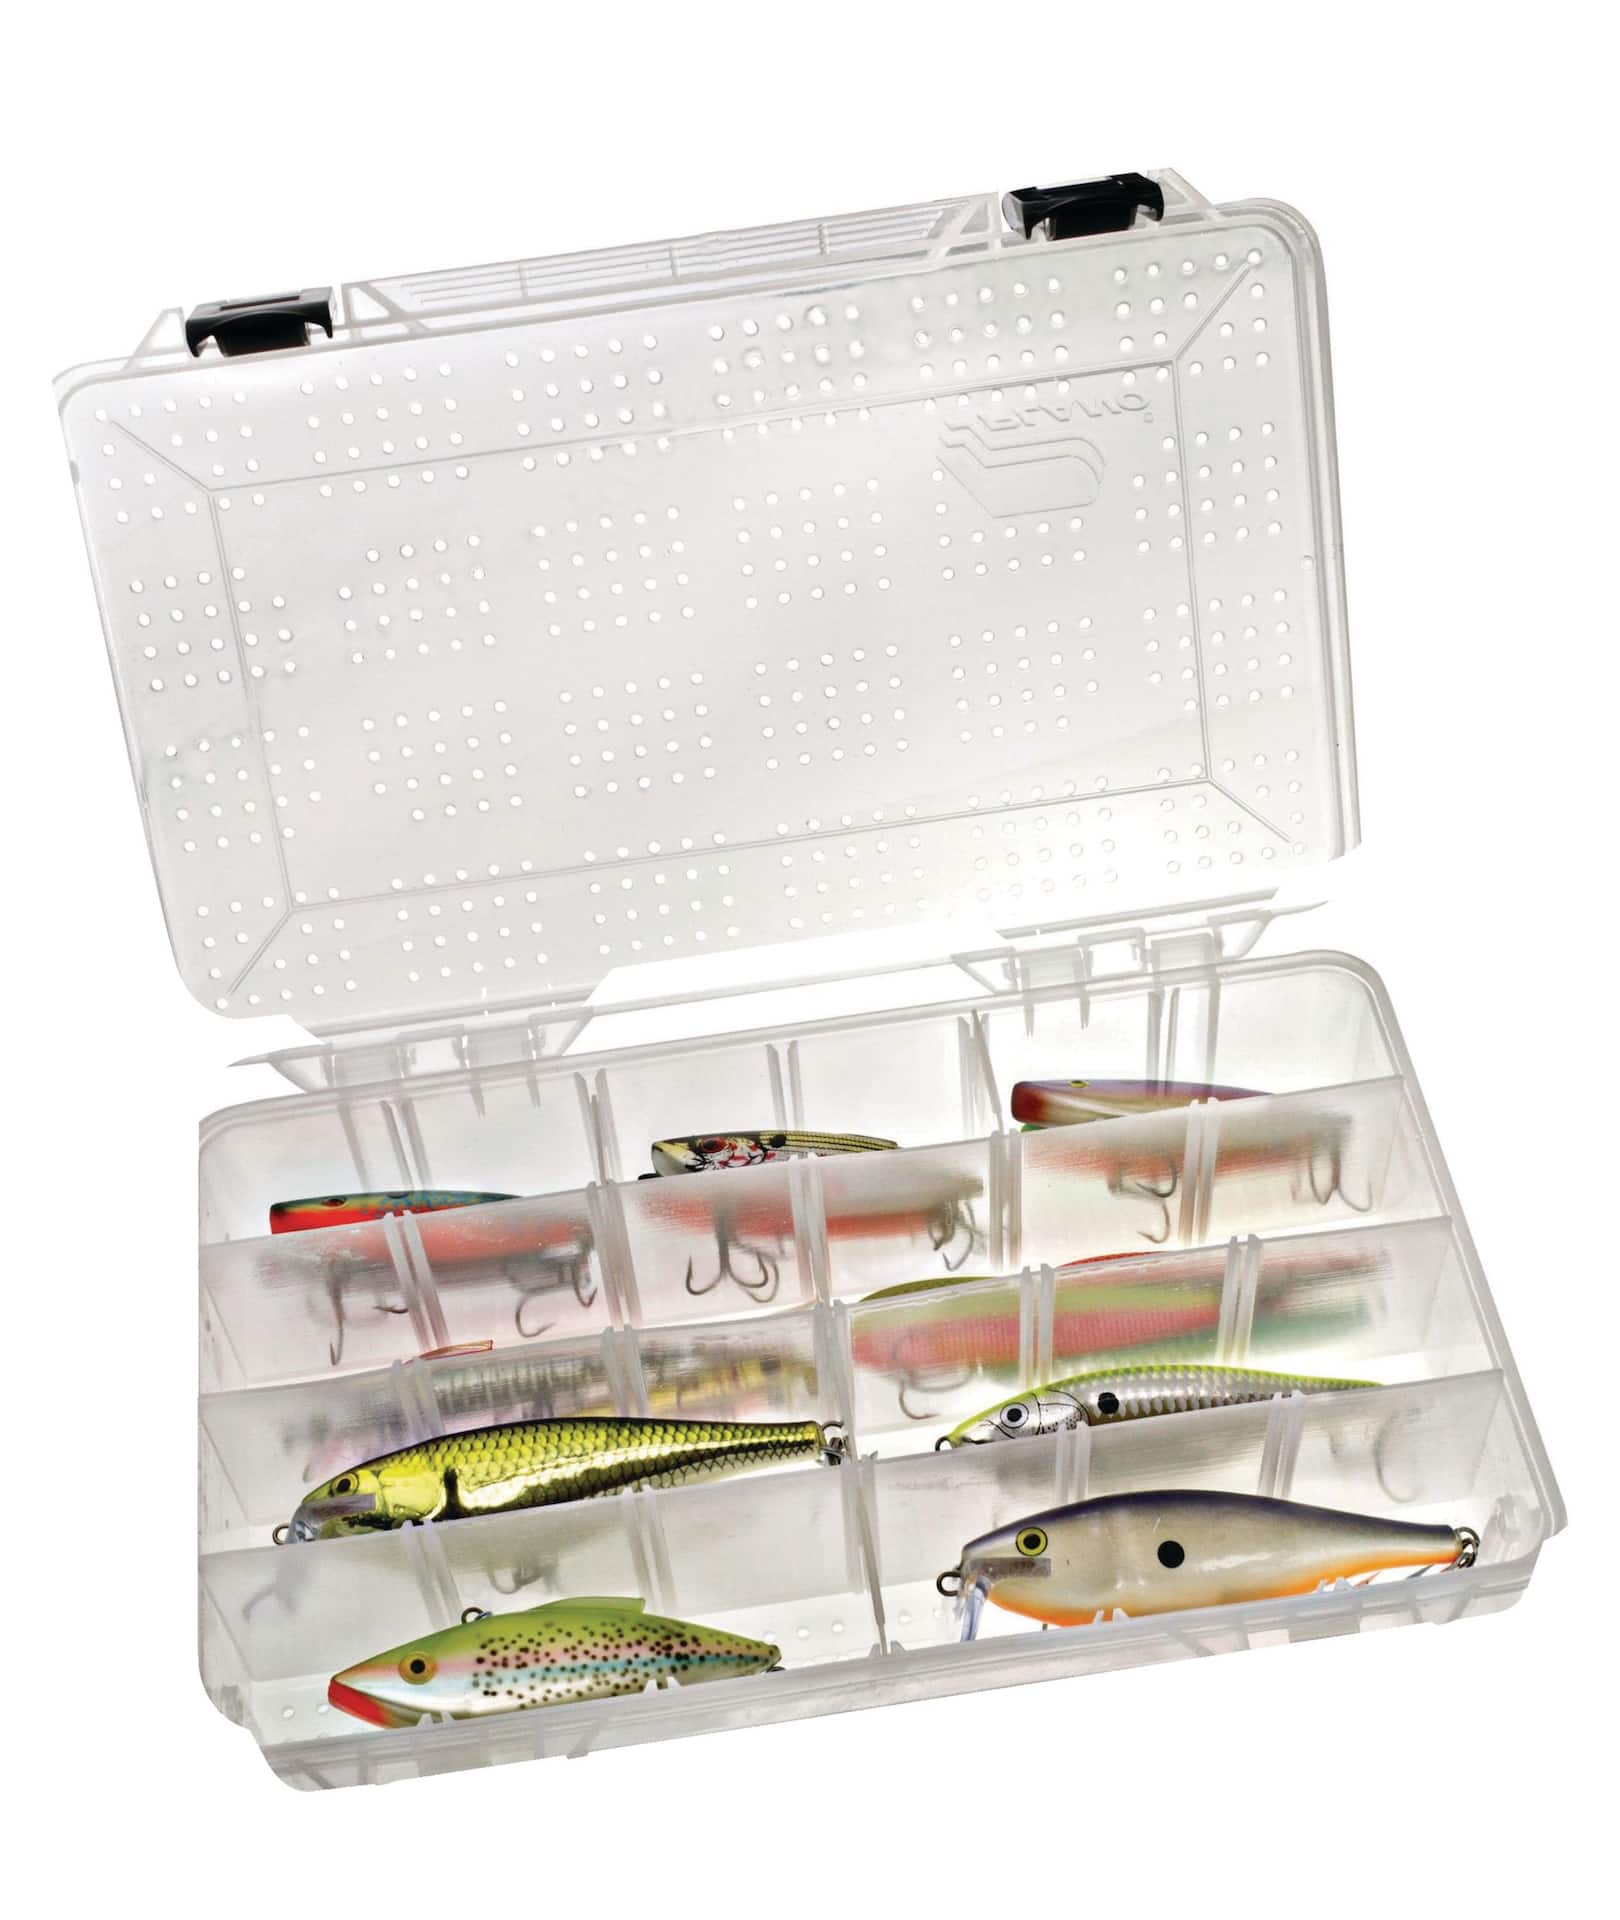 https://media-www.canadiantire.ca/product/playing/fishing/fishing-equipment/1781284/plano-hydro-flo-stowaway-utility-box-4-24-compartments-d7063912-e7f7-41fa-9a7e-bb658fa4a62b-jpgrendition.jpg